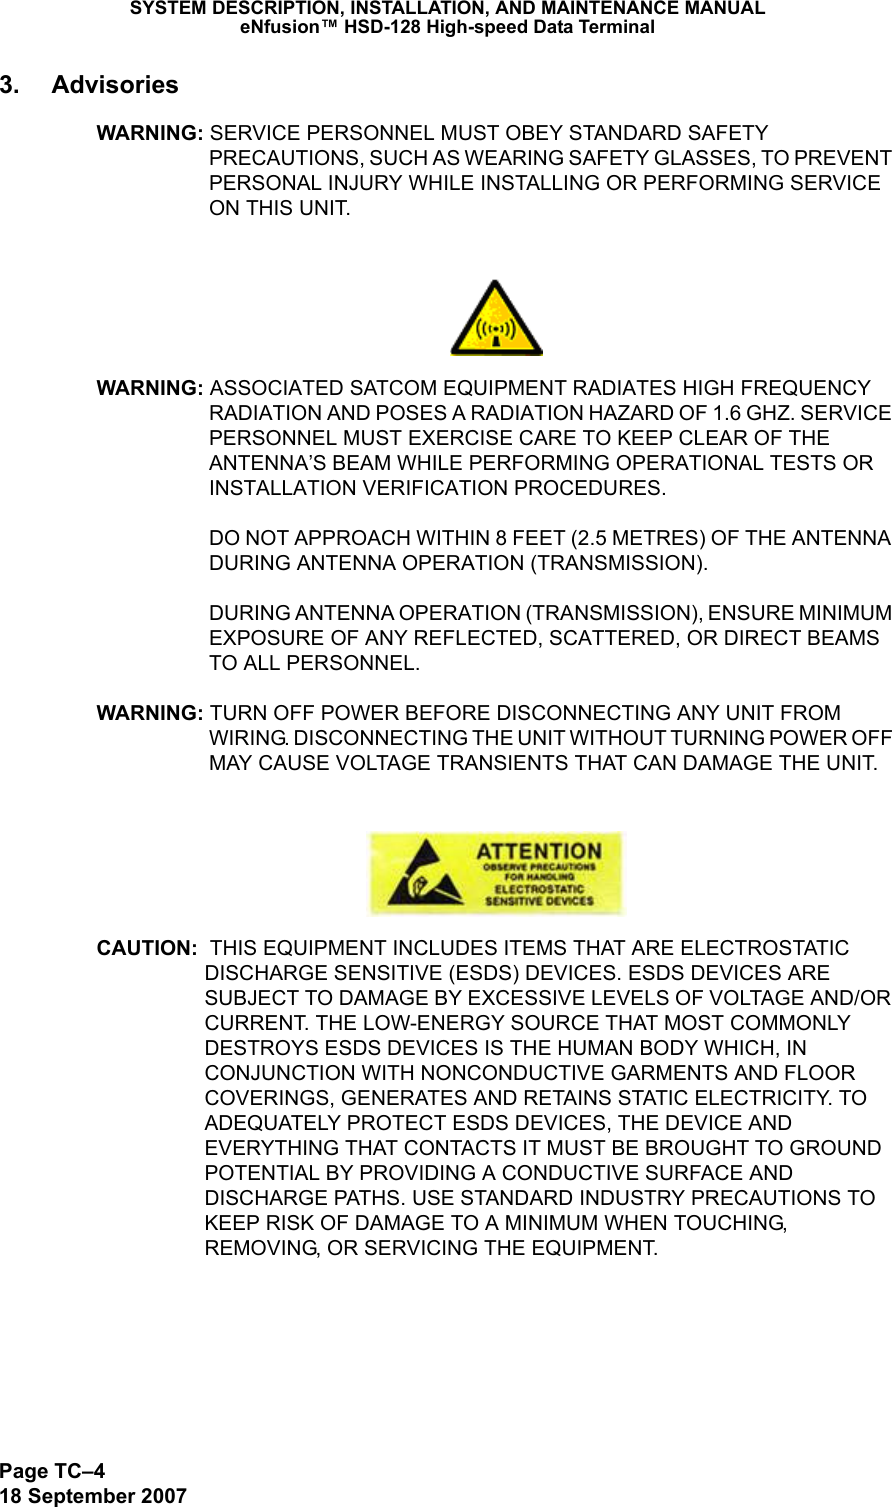 Page TC–418 September 2007SYSTEM DESCRIPTION, INSTALLATION, AND MAINTENANCE MANUALeNfusion™ HSD-128 High-speed Data Terminal3. AdvisoriesWARNING: SERVICE PERSONNEL MUST OBEY STANDARD SAFETY PRECAUTIONS, SUCH AS WEARING SAFETY GLASSES, TO PREVENT PERSONAL INJURY WHILE INSTALLING OR PERFORMING SERVICE ON THIS UNIT.WARNING: ASSOCIATED SATCOM EQUIPMENT RADIATES HIGH FREQUENCY RADIATION AND POSES A RADIATION HAZARD OF 1.6 GHZ. SERVICE PERSONNEL MUST EXERCISE CARE TO KEEP CLEAR OF THE ANTENNA’S BEAM WHILE PERFORMING OPERATIONAL TESTS OR INSTALLATION VERIFICATION PROCEDURES.   DO NOT APPROACH WITHIN 8 FEET (2.5 METRES) OF THE ANTENNA DURING ANTENNA OPERATION (TRANSMISSION).   DURING ANTENNA OPERATION (TRANSMISSION), ENSURE MINIMUM EXPOSURE OF ANY REFLECTED, SCATTERED, OR DIRECT BEAMS TO ALL PERSONNEL.WARNING: TURN OFF POWER BEFORE DISCONNECTING ANY UNIT FROM WIRING. DISCONNECTING THE UNIT WITHOUT TURNING POWER OFF MAY CAUSE VOLTAGE TRANSIENTS THAT CAN DAMAGE THE UNIT.CAUTION:  THIS EQUIPMENT INCLUDES ITEMS THAT ARE ELECTROSTATIC DISCHARGE SENSITIVE (ESDS) DEVICES. ESDS DEVICES ARE SUBJECT TO DAMAGE BY EXCESSIVE LEVELS OF VOLTAGE AND/OR CURRENT. THE LOW-ENERGY SOURCE THAT MOST COMMONLY DESTROYS ESDS DEVICES IS THE HUMAN BODY WHICH, IN CONJUNCTION WITH NONCONDUCTIVE GARMENTS AND FLOOR COVERINGS, GENERATES AND RETAINS STATIC ELECTRICITY. TO ADEQUATELY PROTECT ESDS DEVICES, THE DEVICE AND EVERYTHING THAT CONTACTS IT MUST BE BROUGHT TO GROUND POTENTIAL BY PROVIDING A CONDUCTIVE SURFACE AND DISCHARGE PATHS. USE STANDARD INDUSTRY PRECAUTIONS TO KEEP RISK OF DAMAGE TO A MINIMUM WHEN TOUCHING, REMOVING, OR SERVICING THE EQUIPMENT.